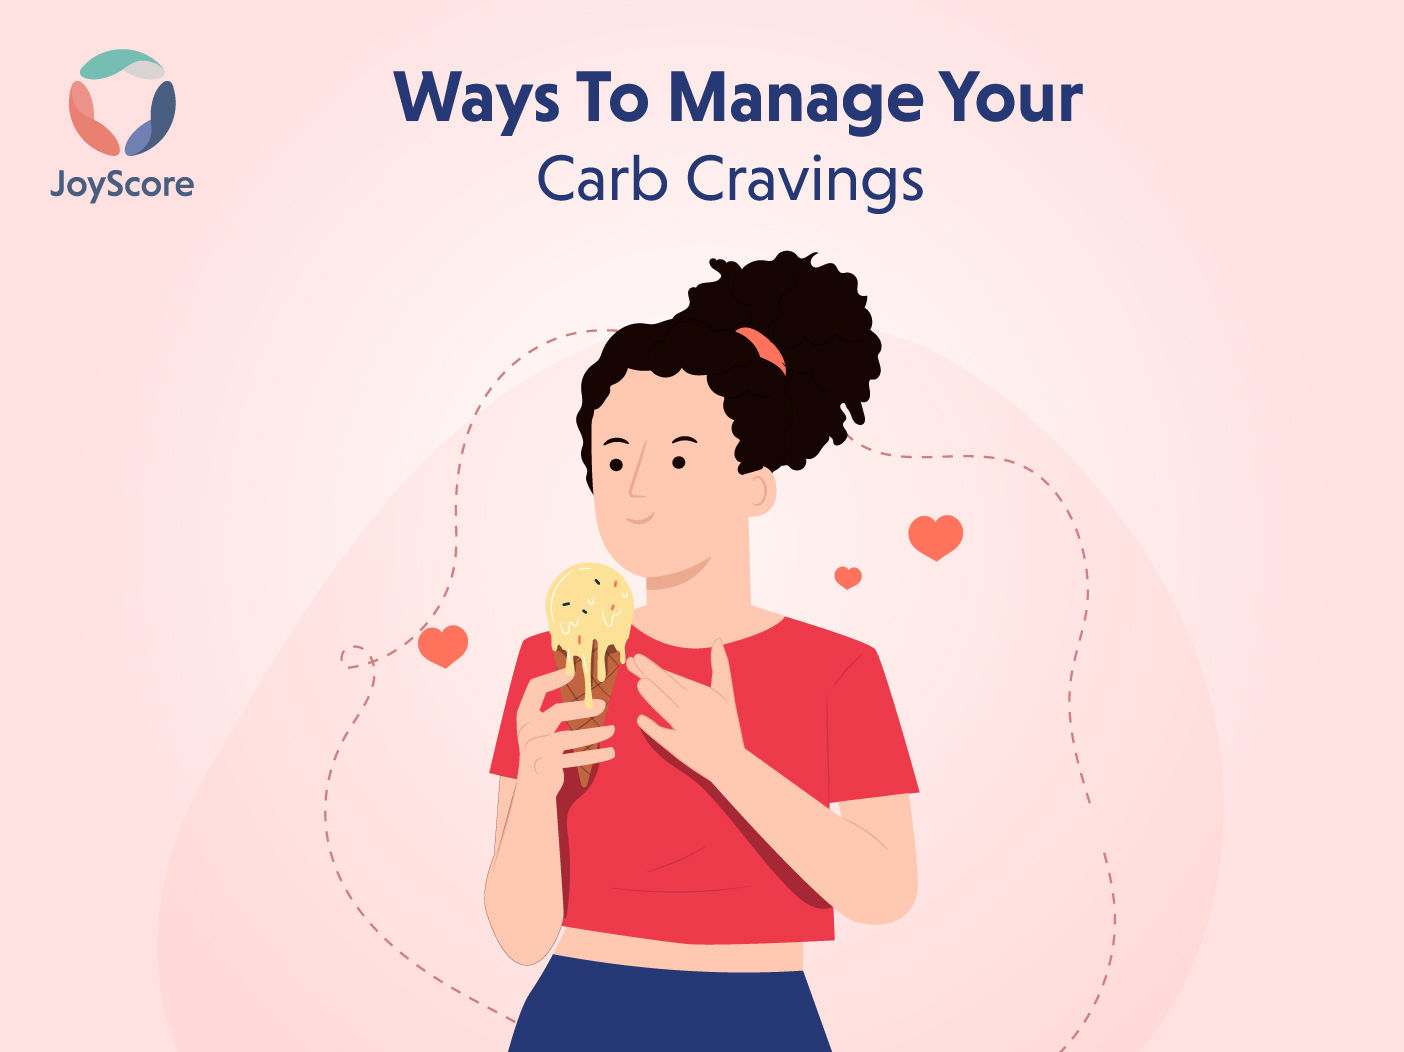 7 Effective Ways To Manage Your Carb Cravings